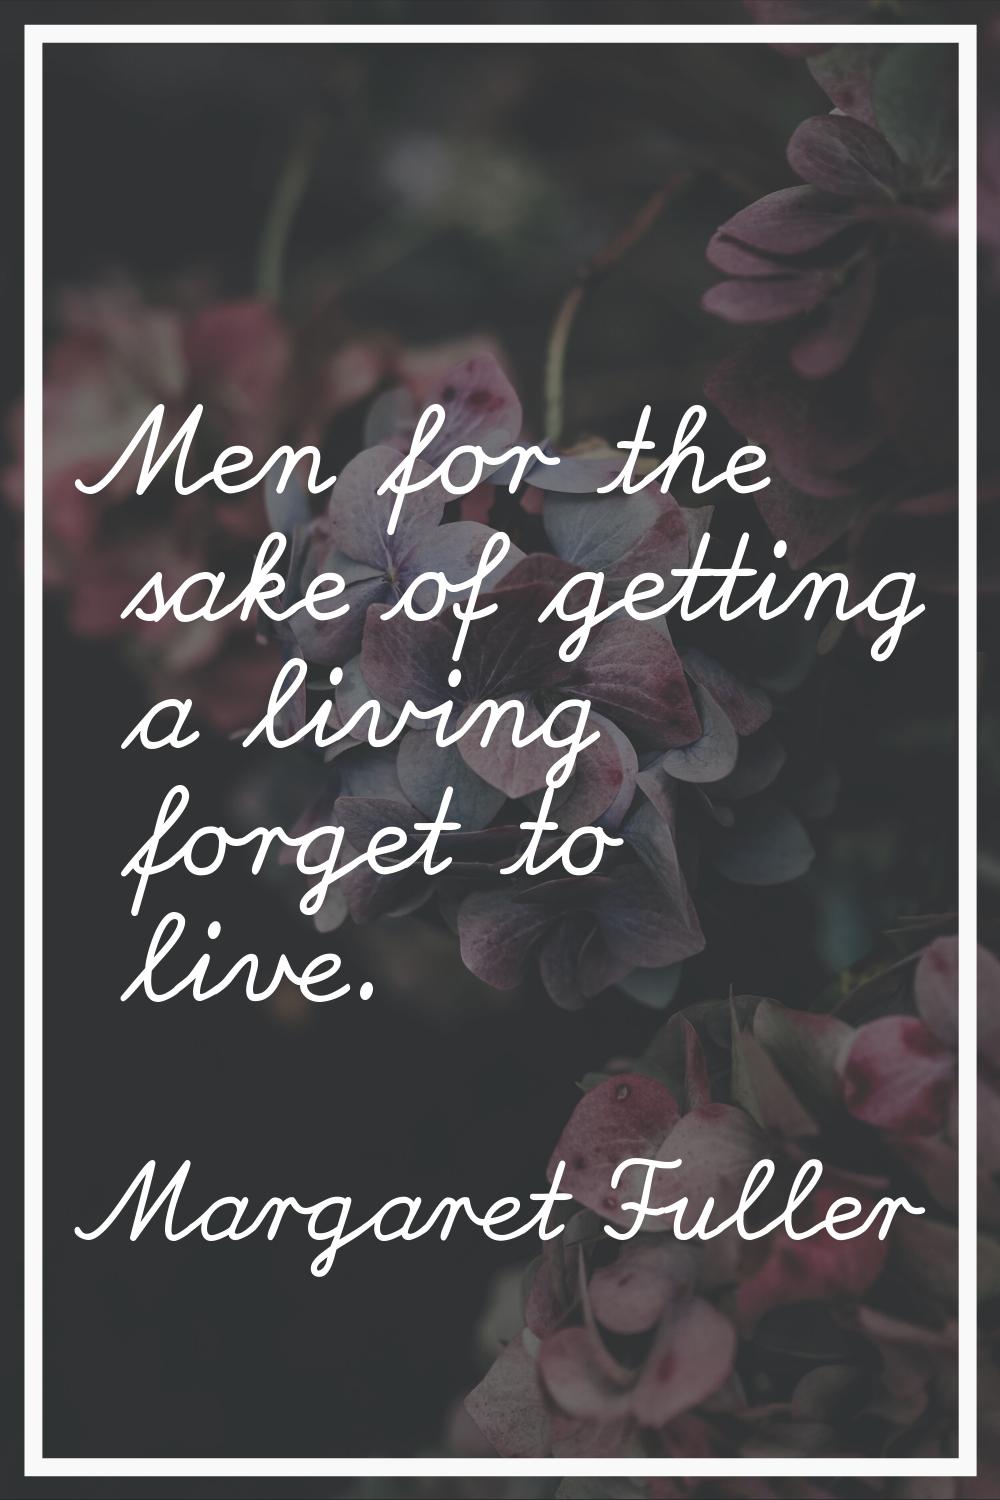 Men for the sake of getting a living forget to live.